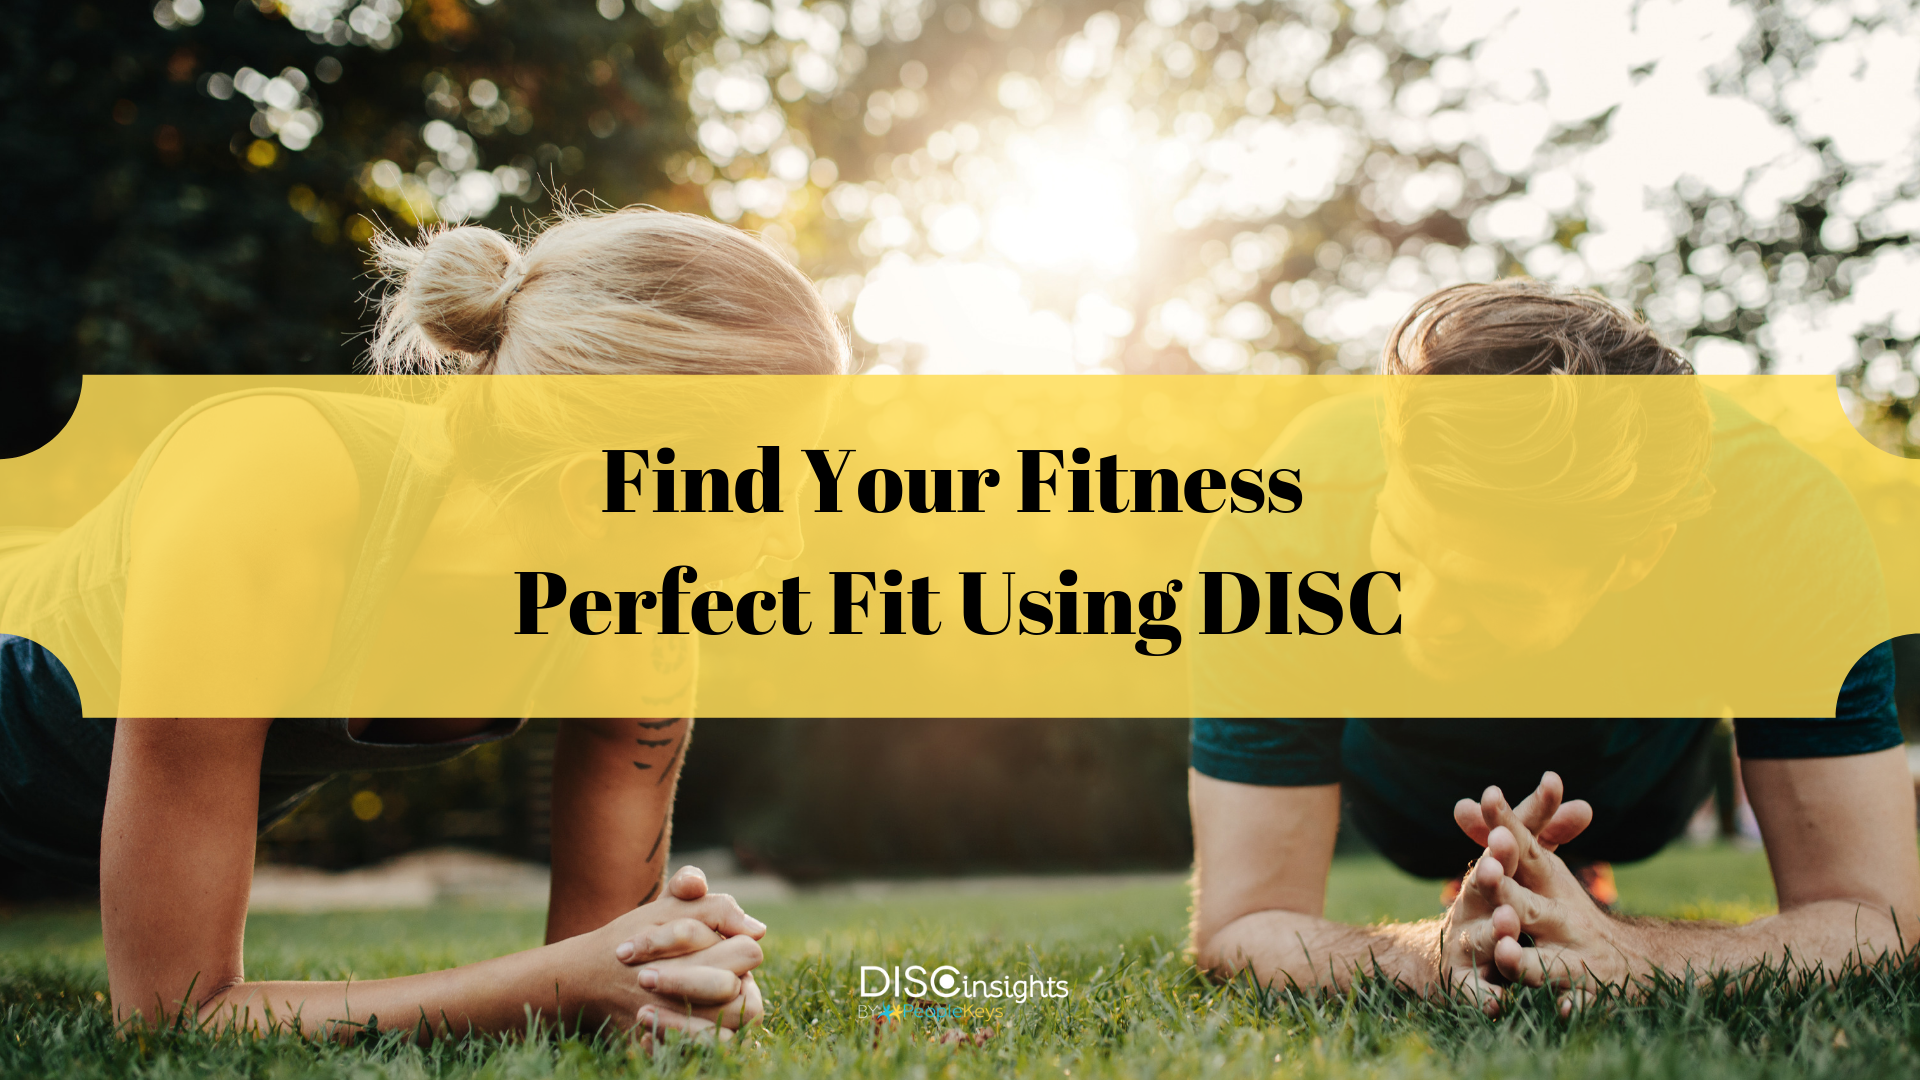 Find Your Fitness Perfect Fit Using DISC